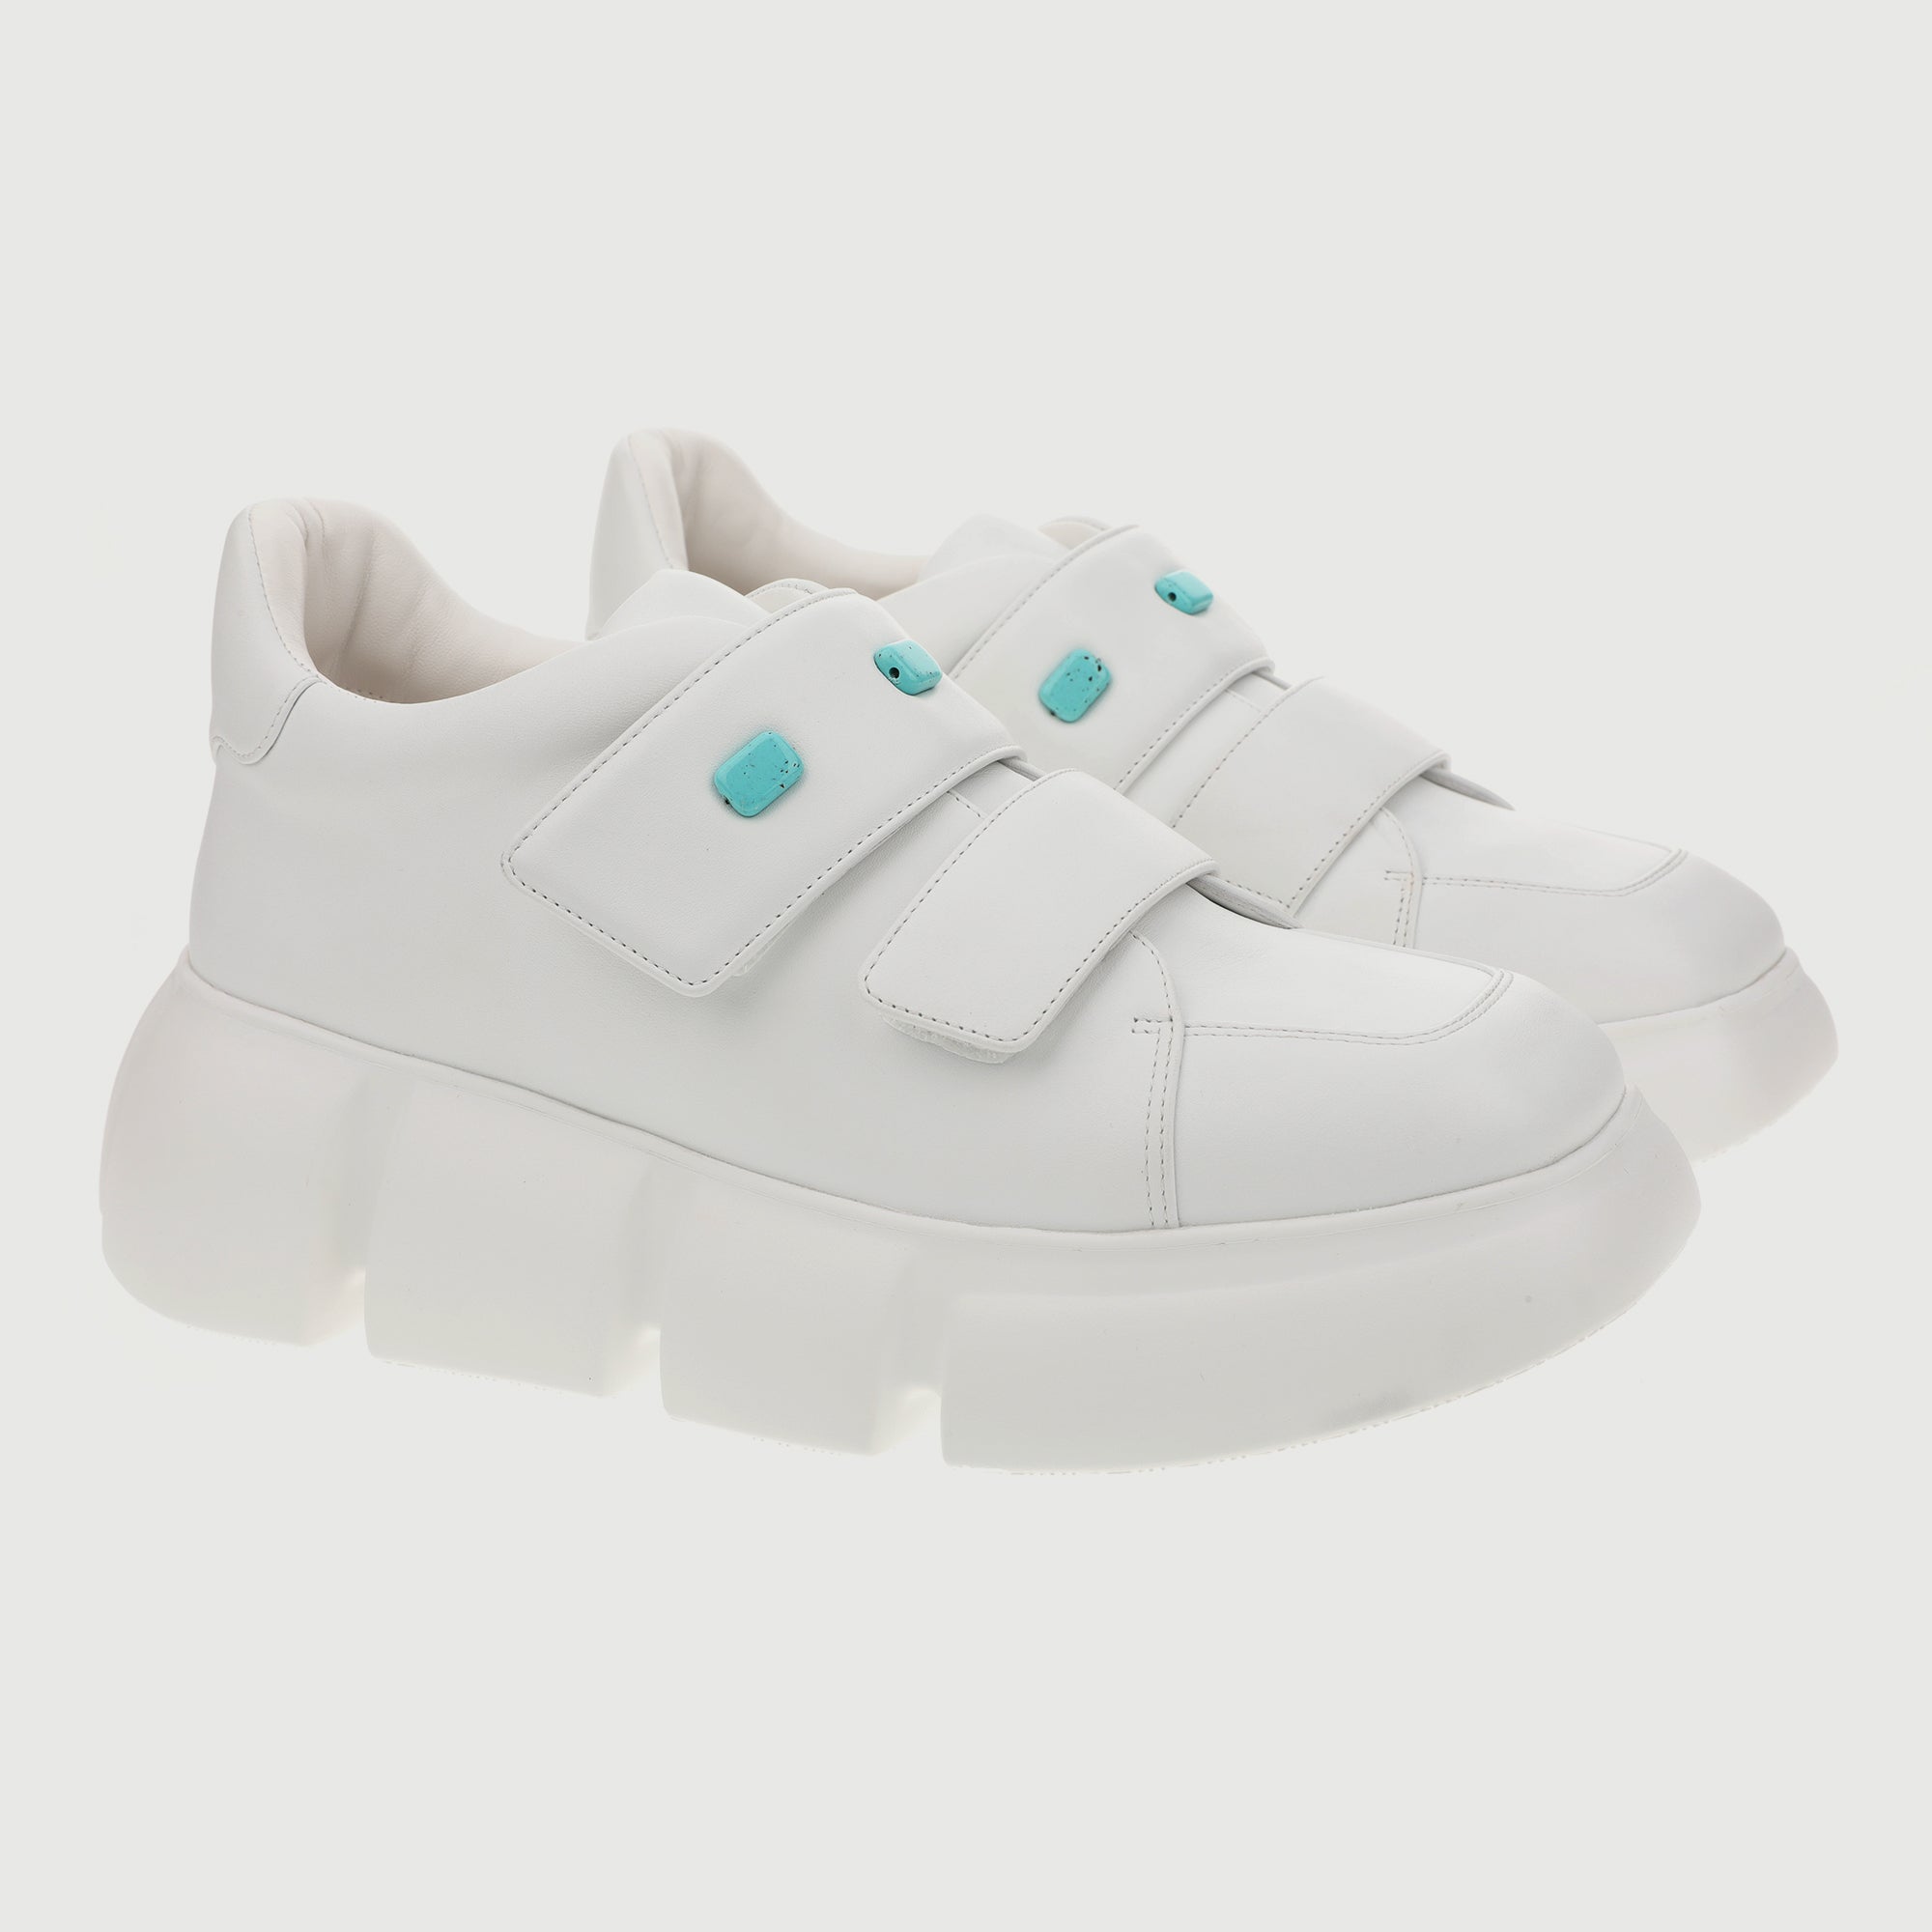 Sneaker with Turquoise